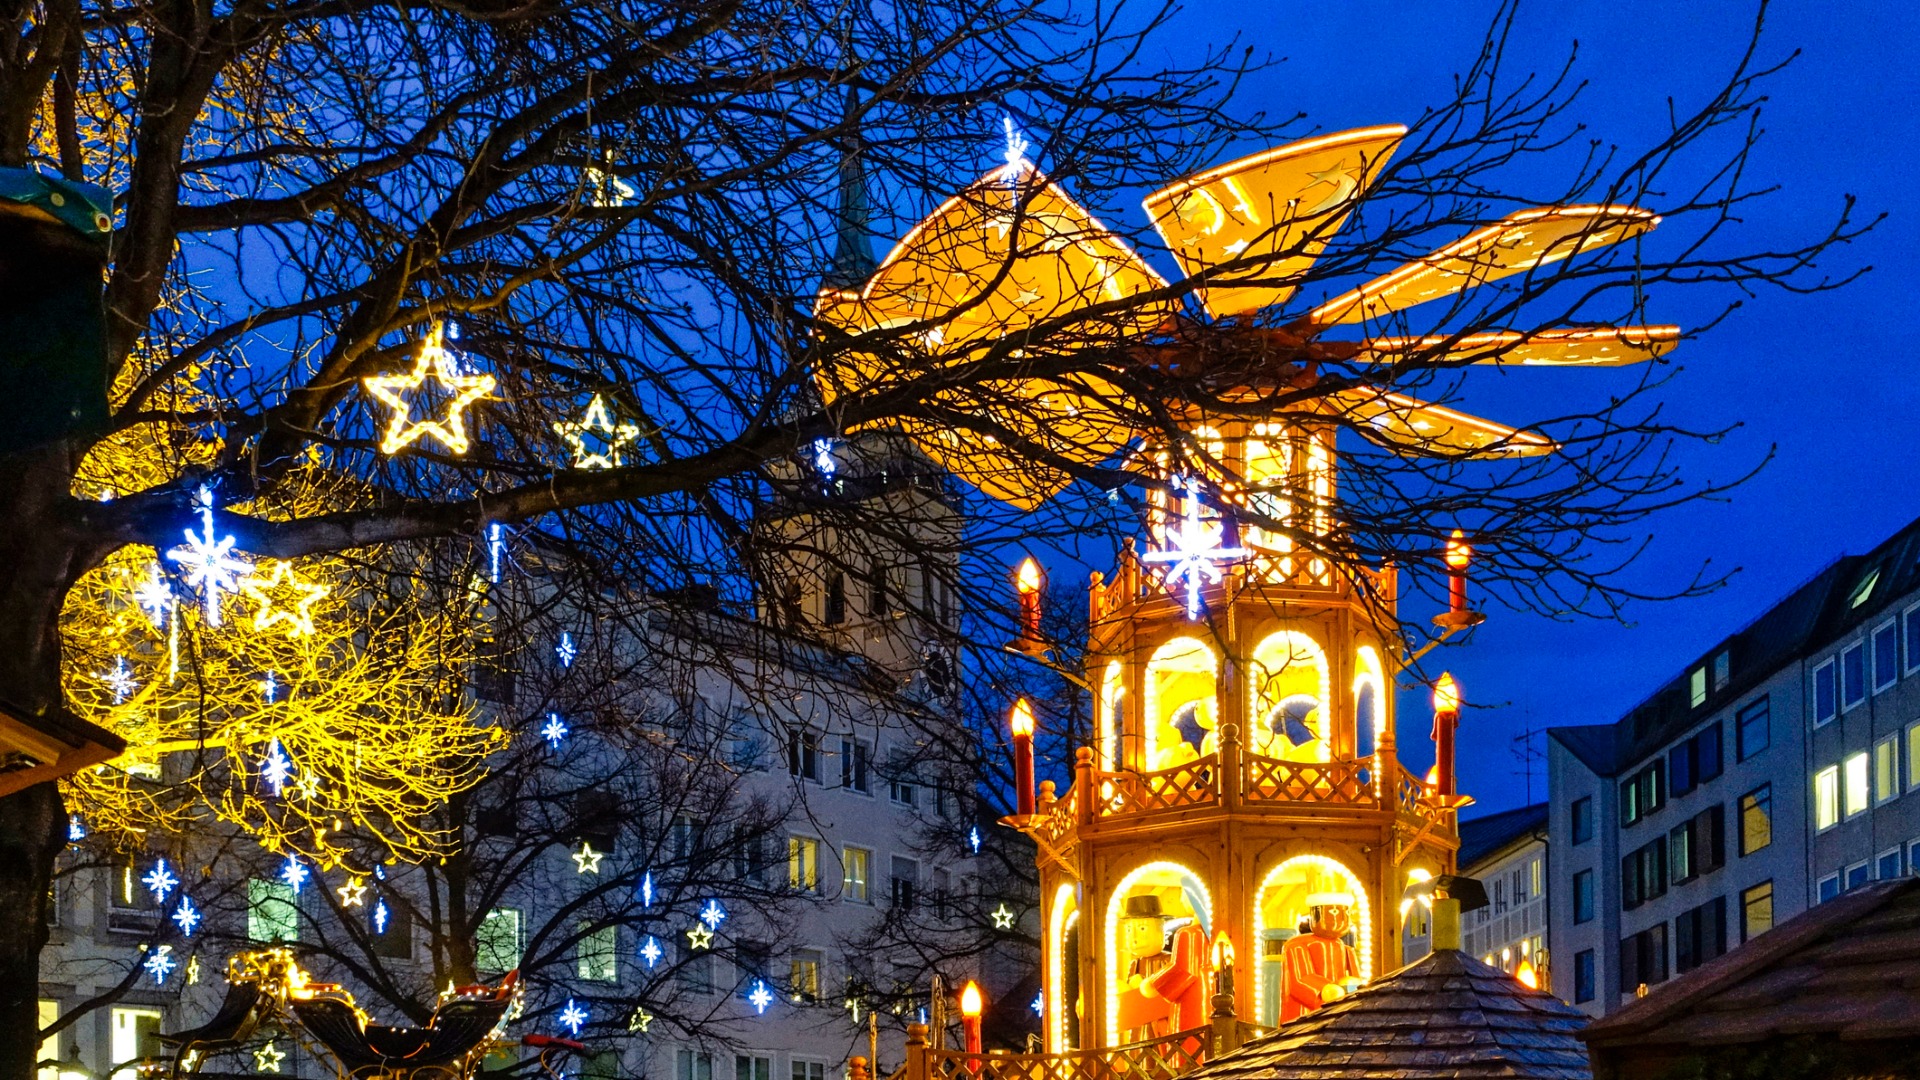 This image shows a wooden carousel at a Christmas market in Munich. 